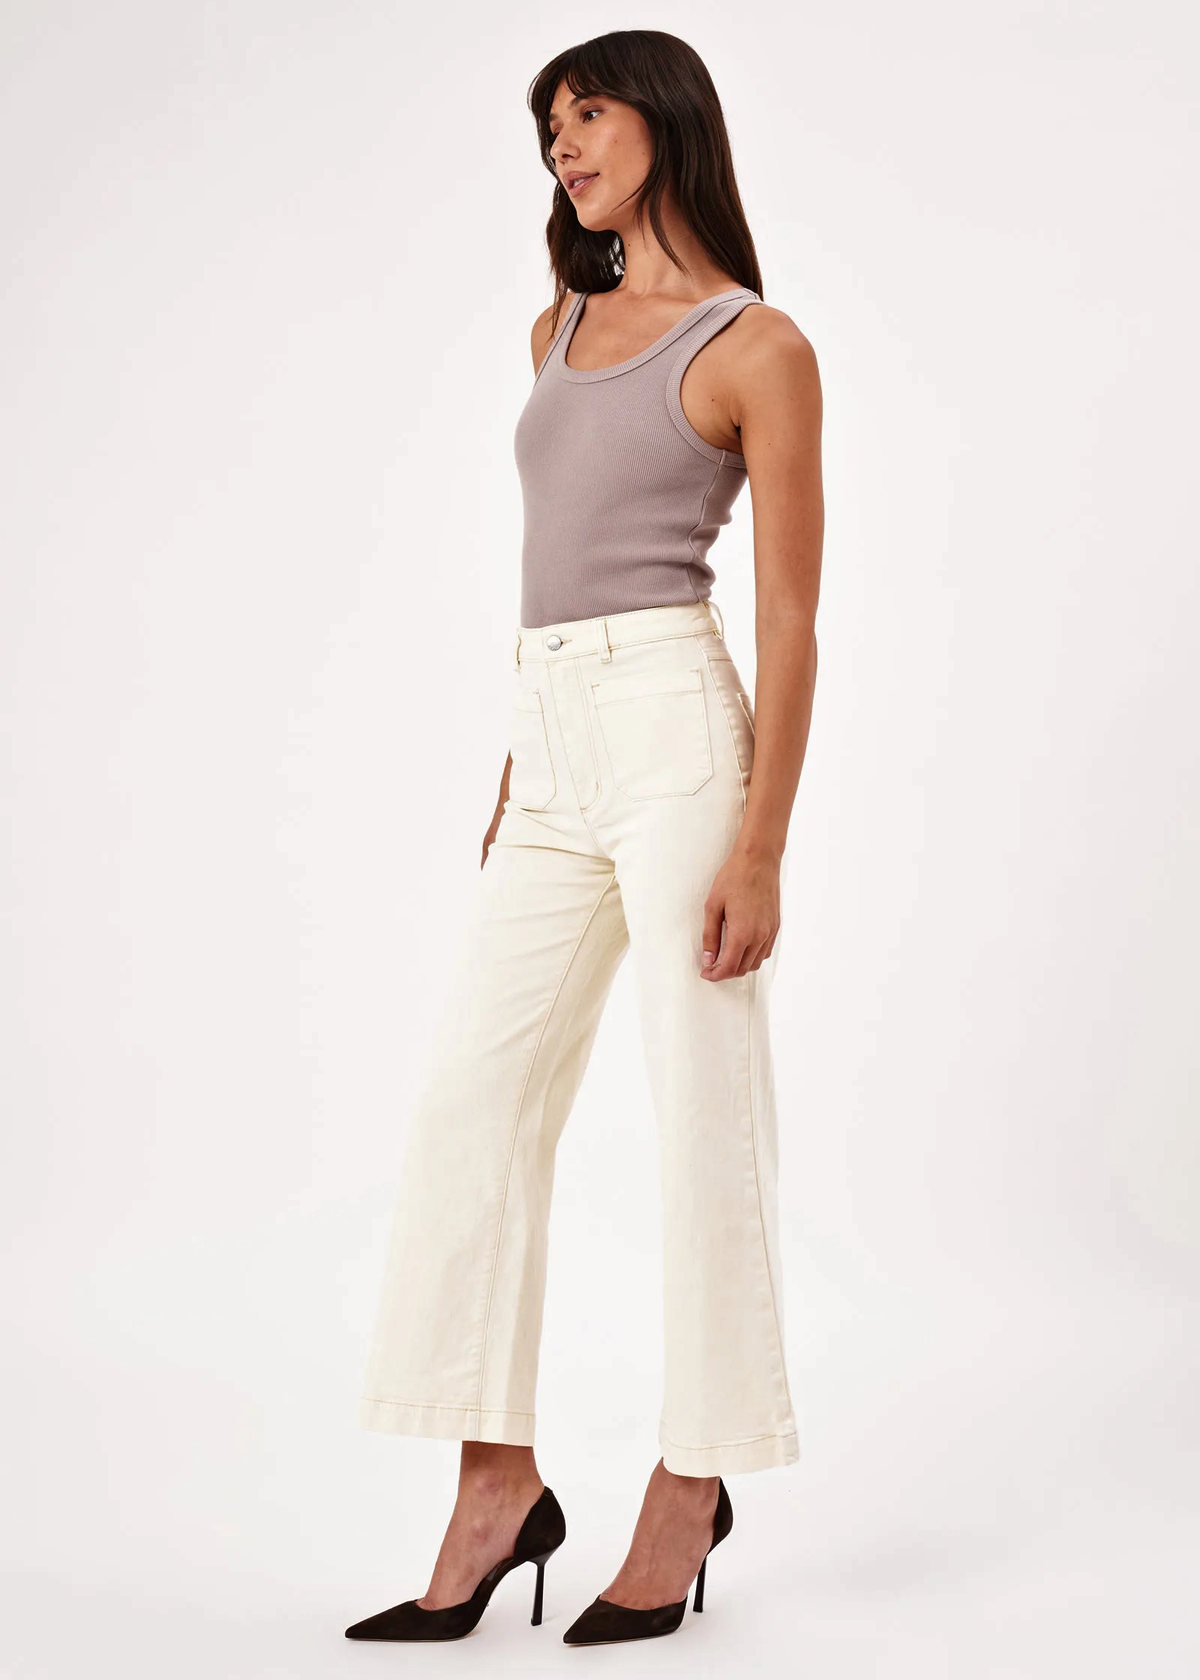 Rolla's Jeans Buttercream Ivory Sailor Jean with a high rise waist, patch front pockets, and wide, cropped ankle length leg